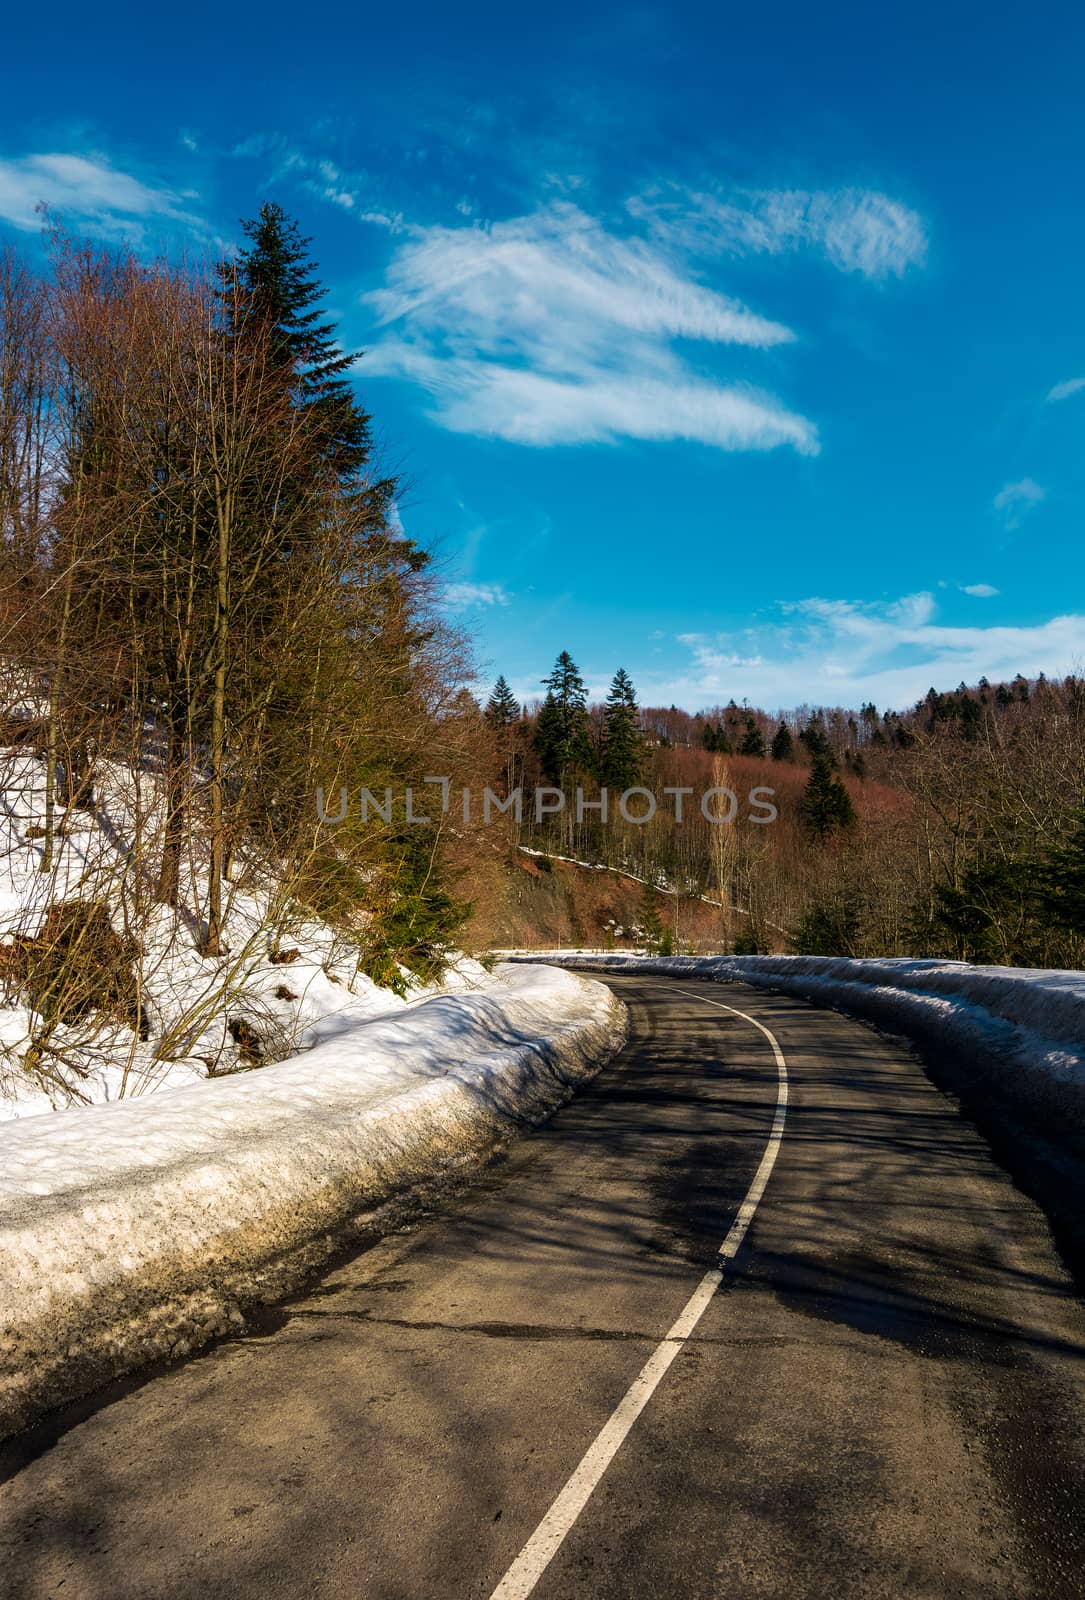 turnaround on the mountain road in winter. forested hills with snow on roadside under the clear blue sky